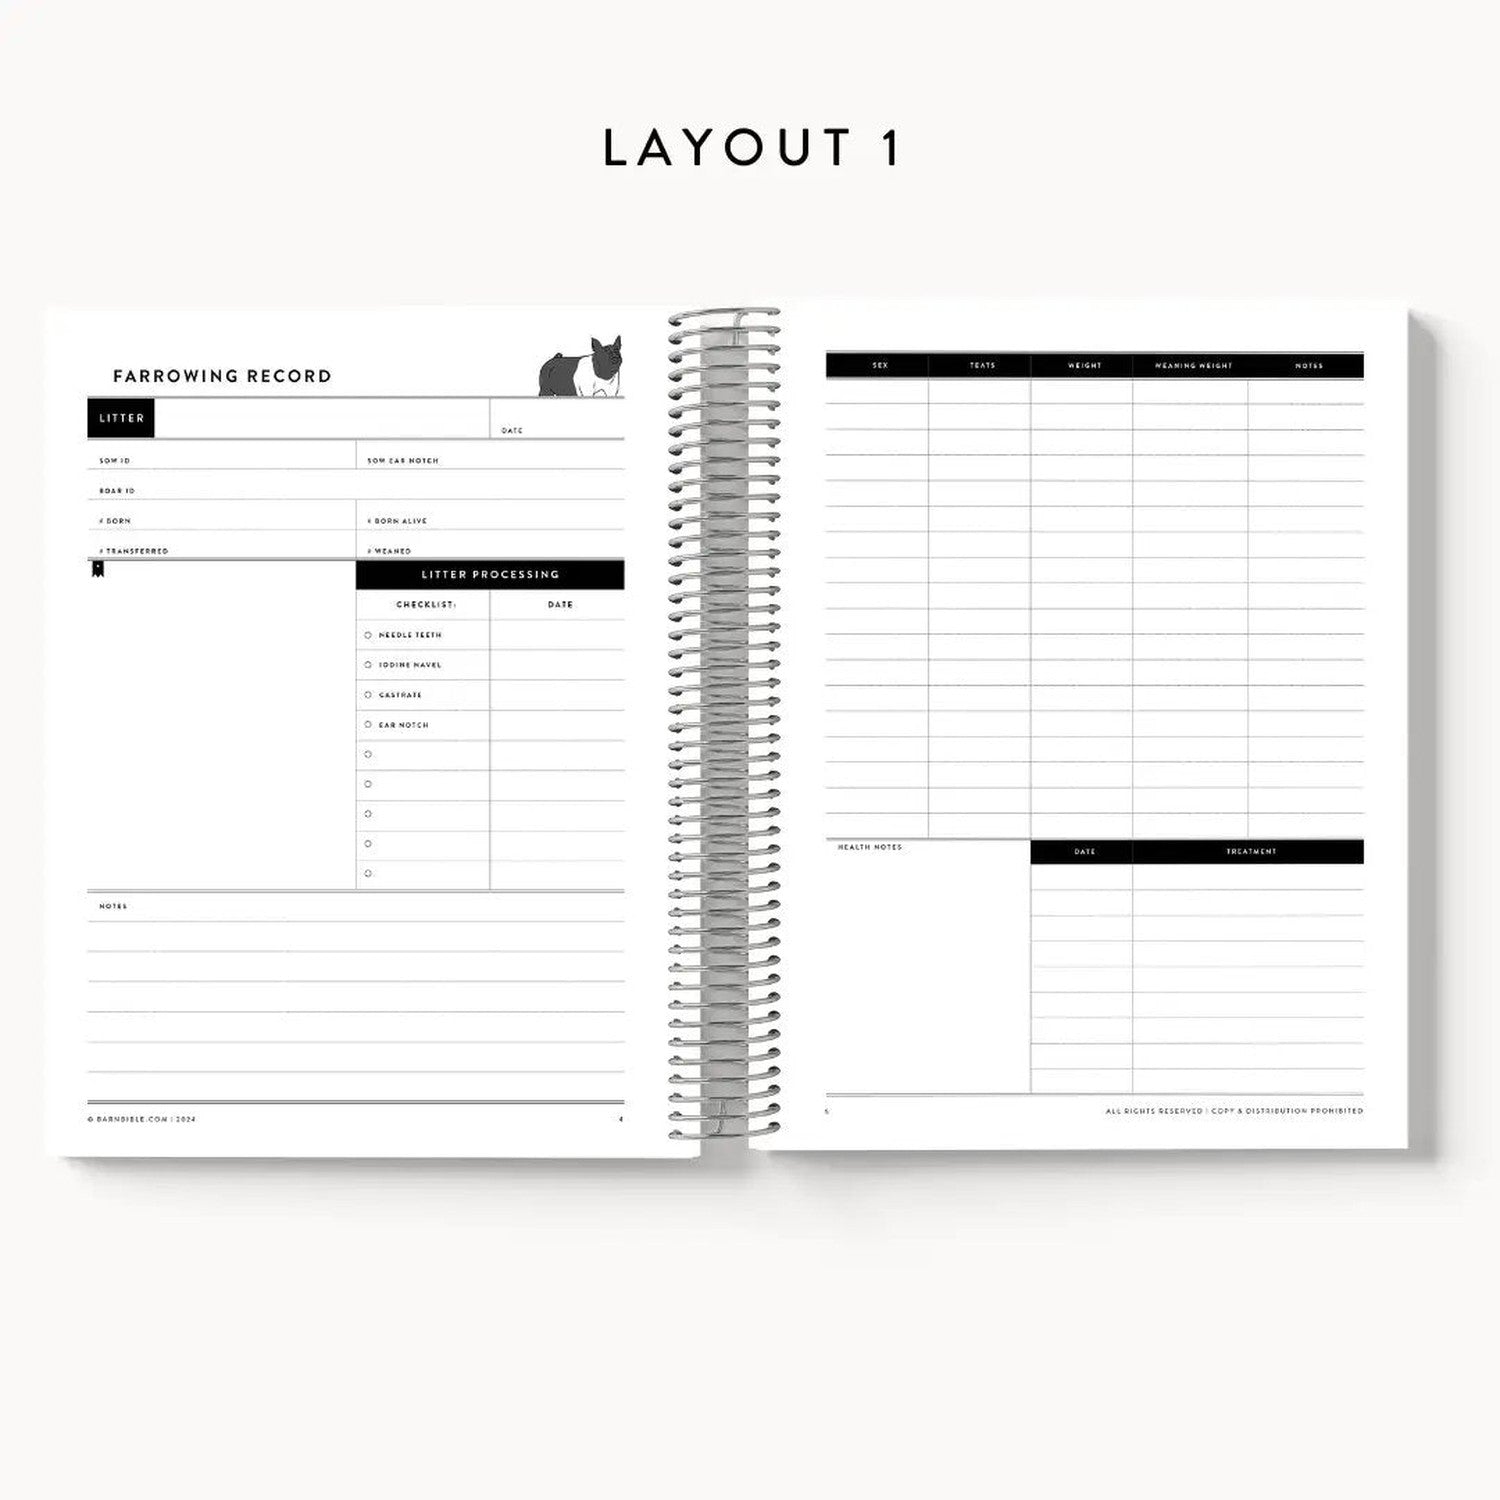 Personalized-Livestock-Farrowing Record Planner - Solid